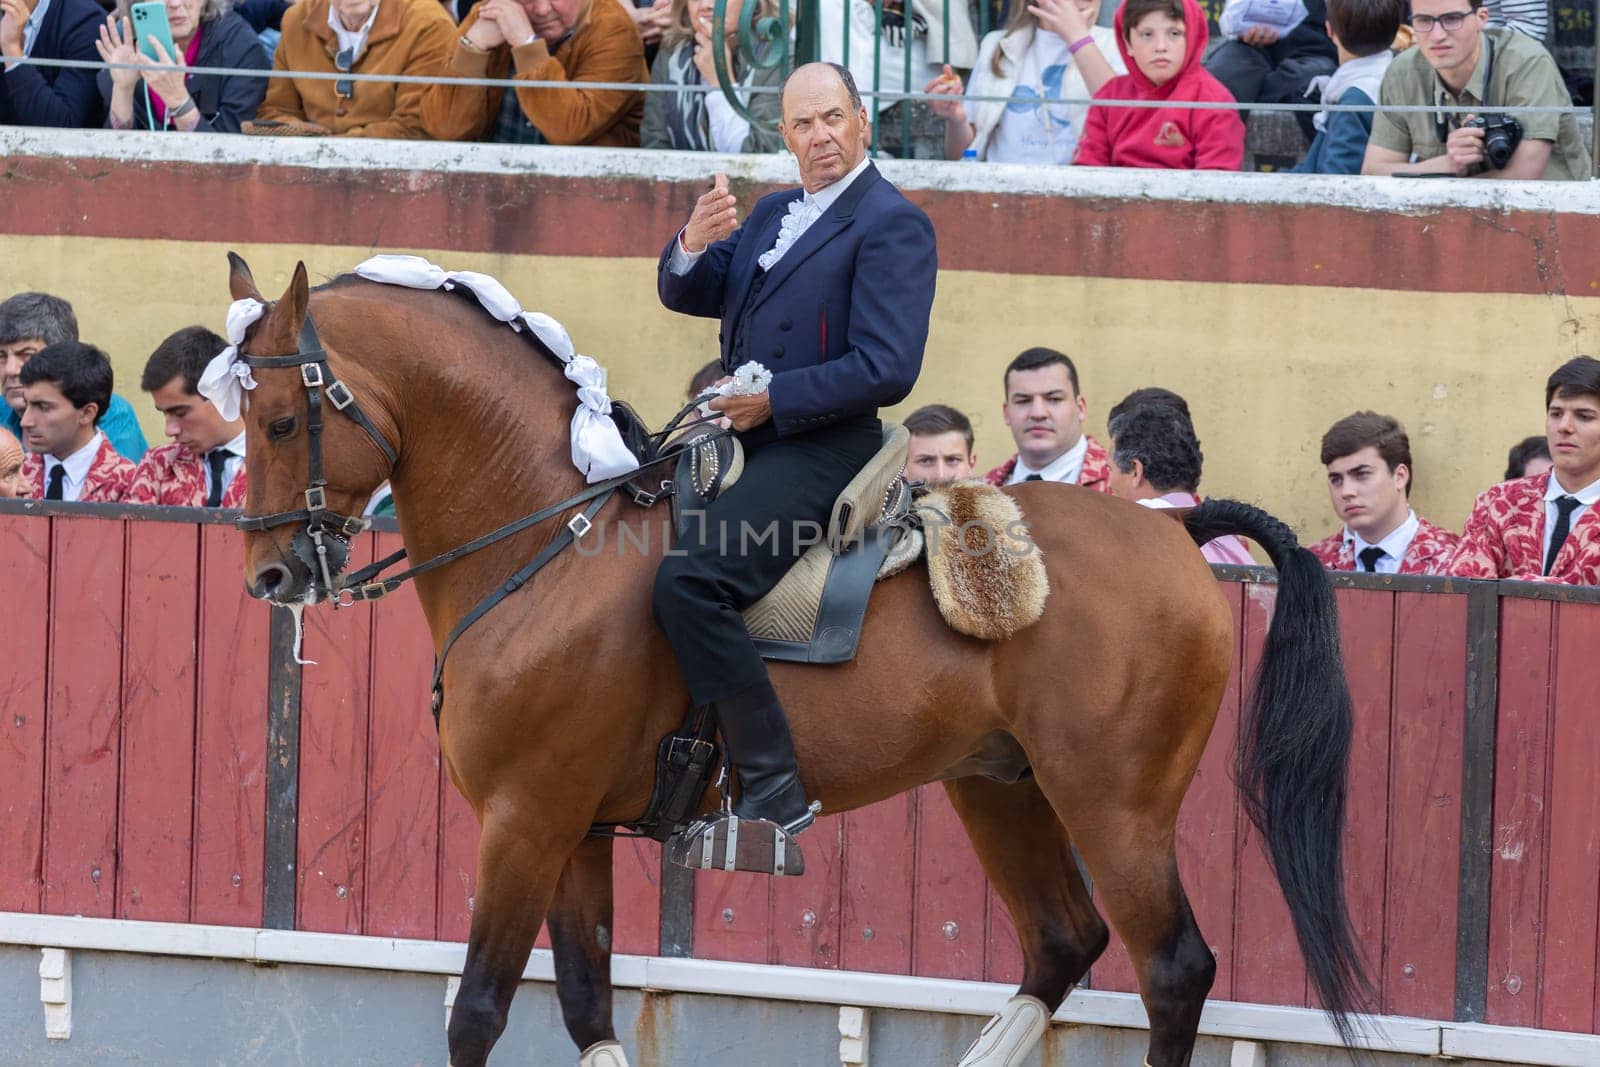 March 26, 2023 Lisbon, Portugal: Tourada - man in suit cavaleiro on a horseback on arena of amphitheater. Mid shot